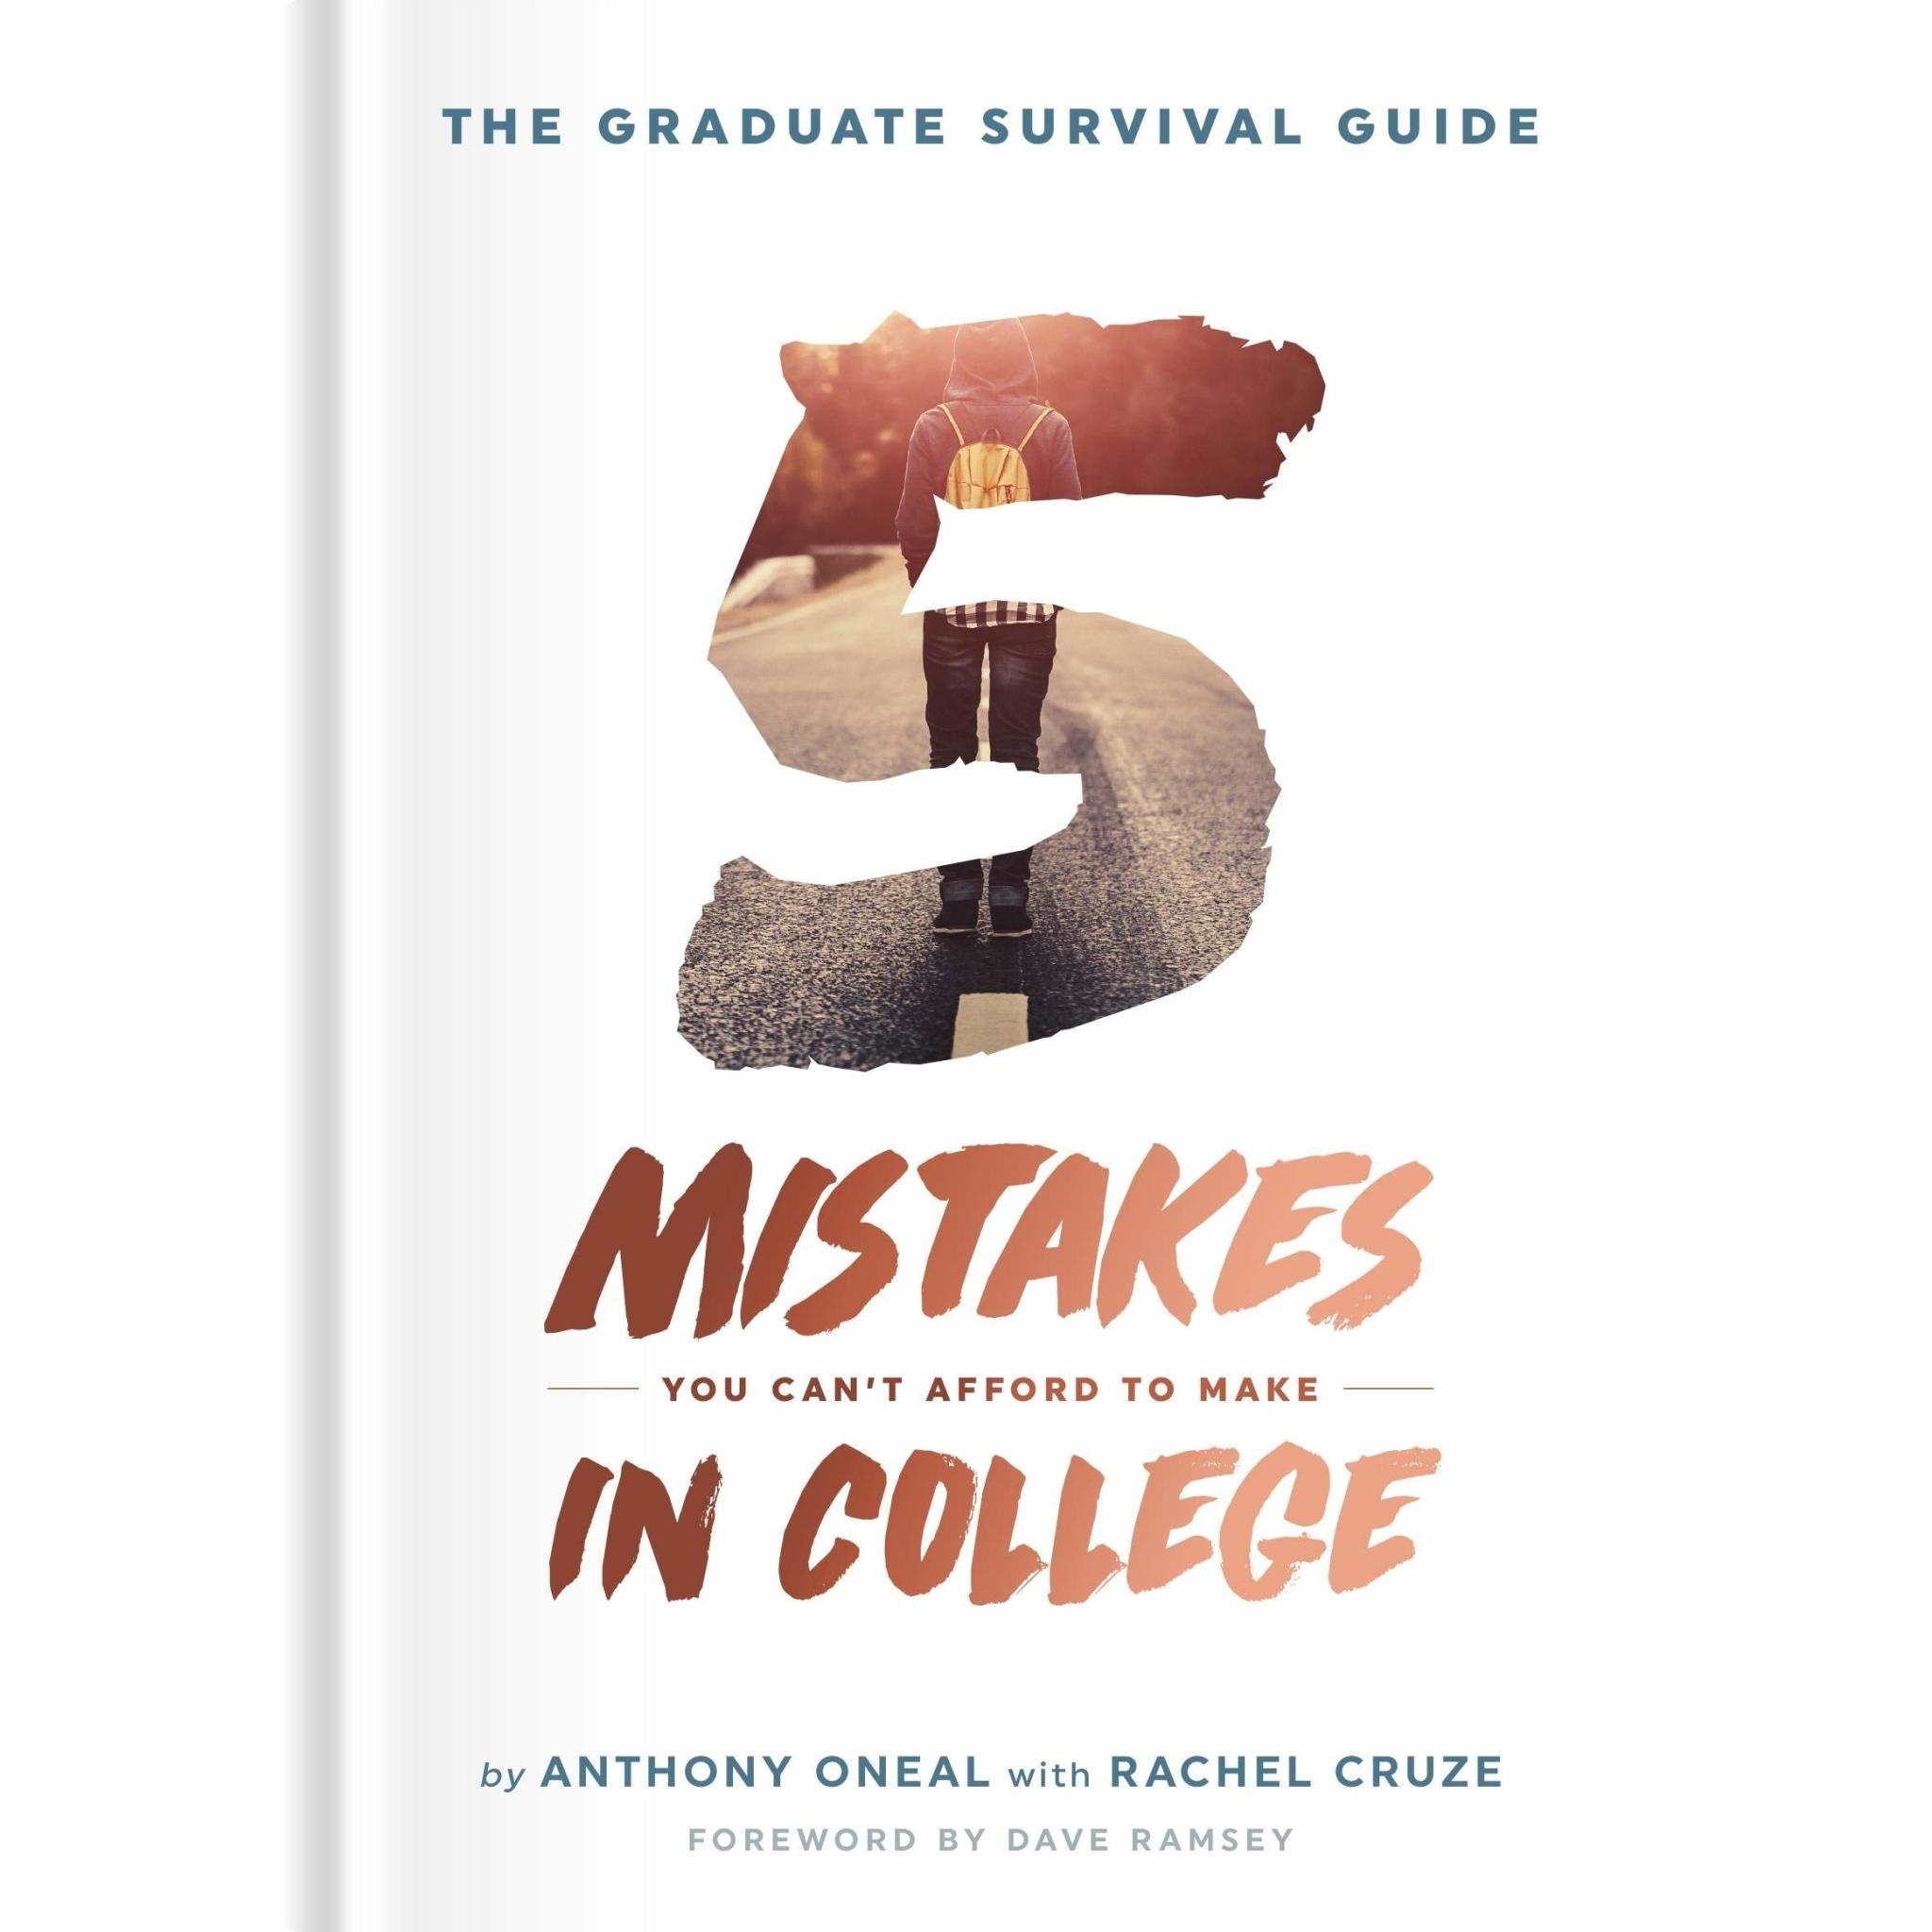 Rachel Cruze The Graduate Survival Guide: 5 Mistakes You Can't Afford to Make in College